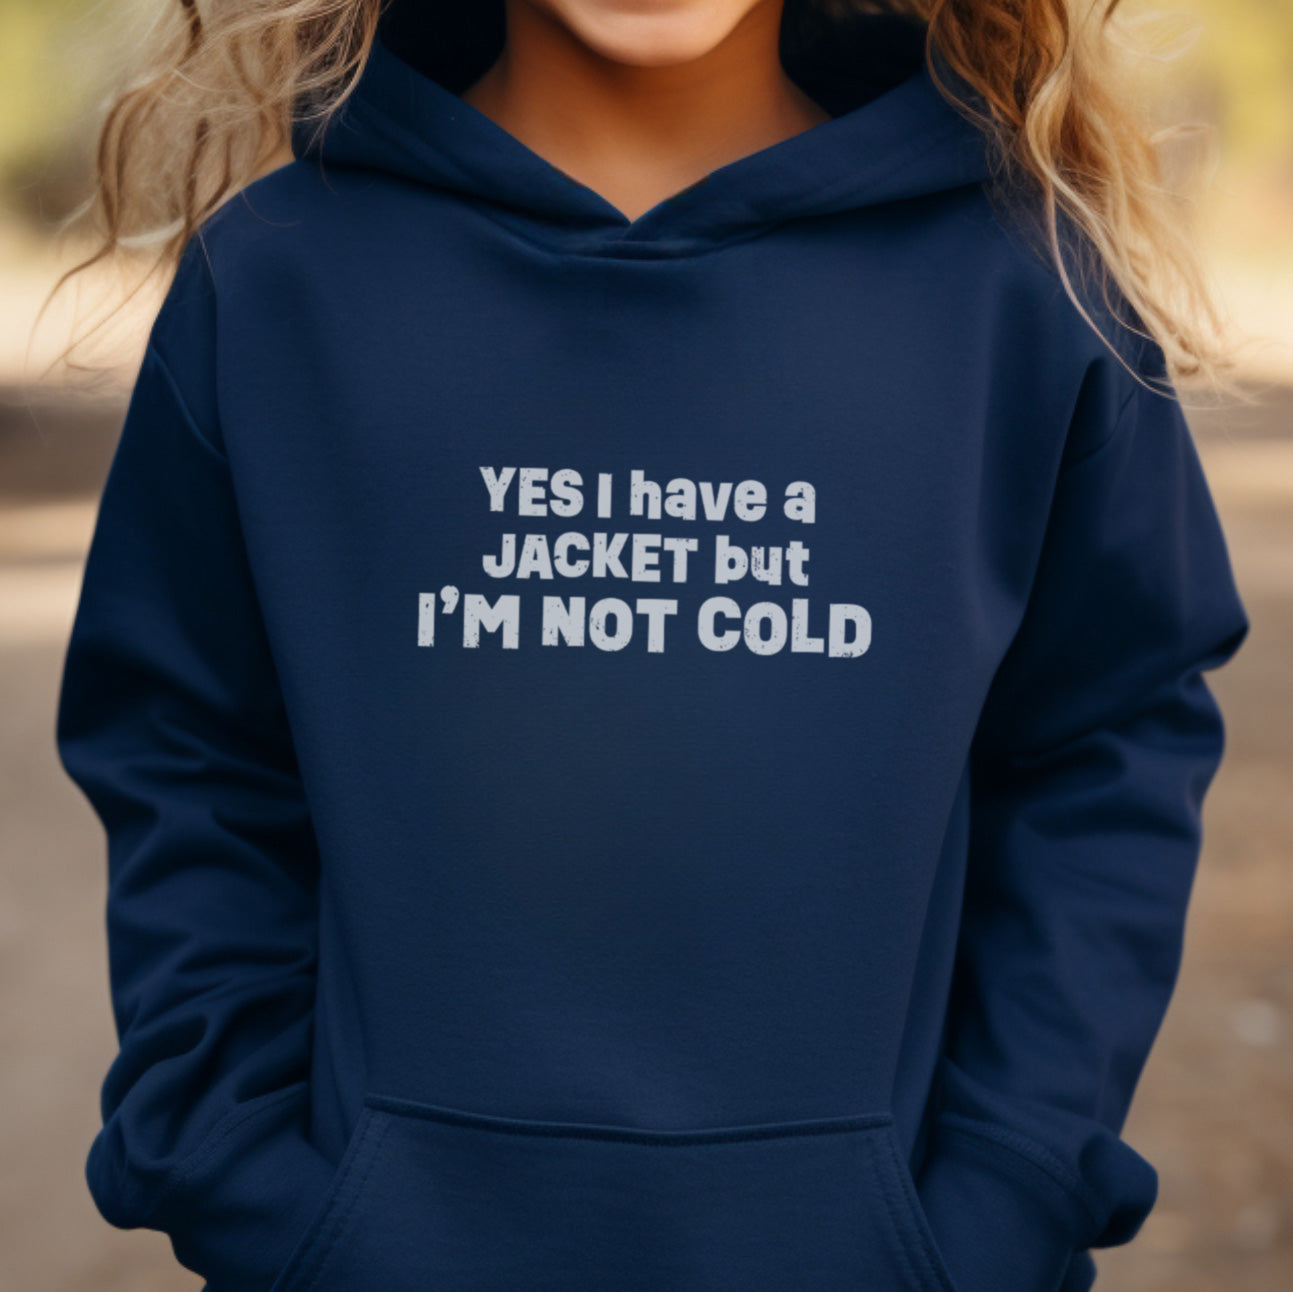 I'm Not Cold hoodie (kids sizes)